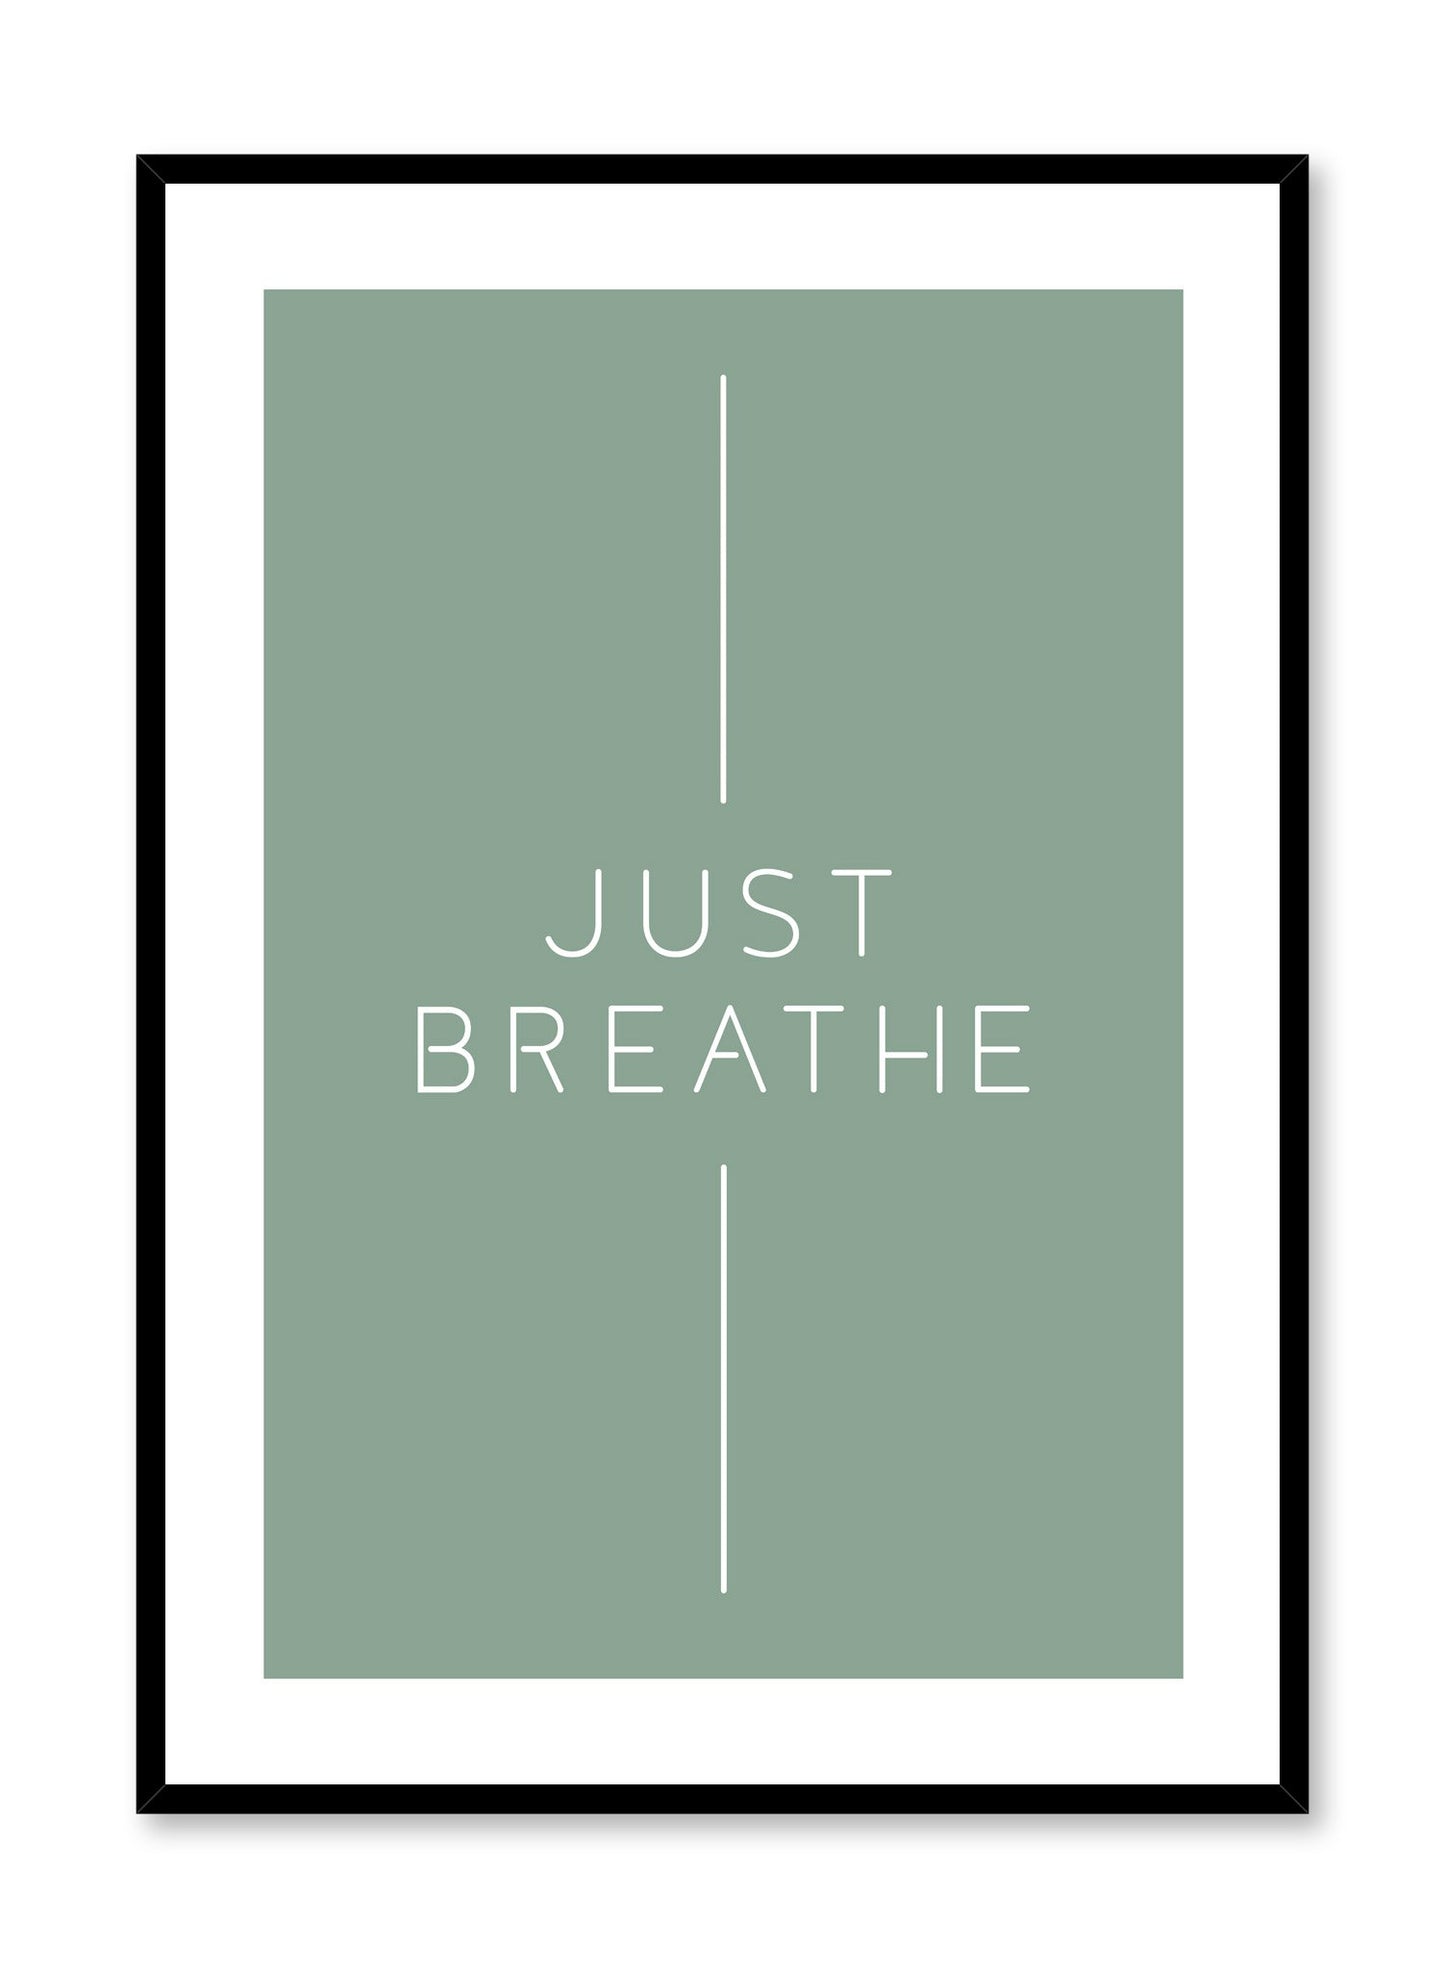 Modern minimalist typography poster by Opposite Wall with Just Breathe quote in green